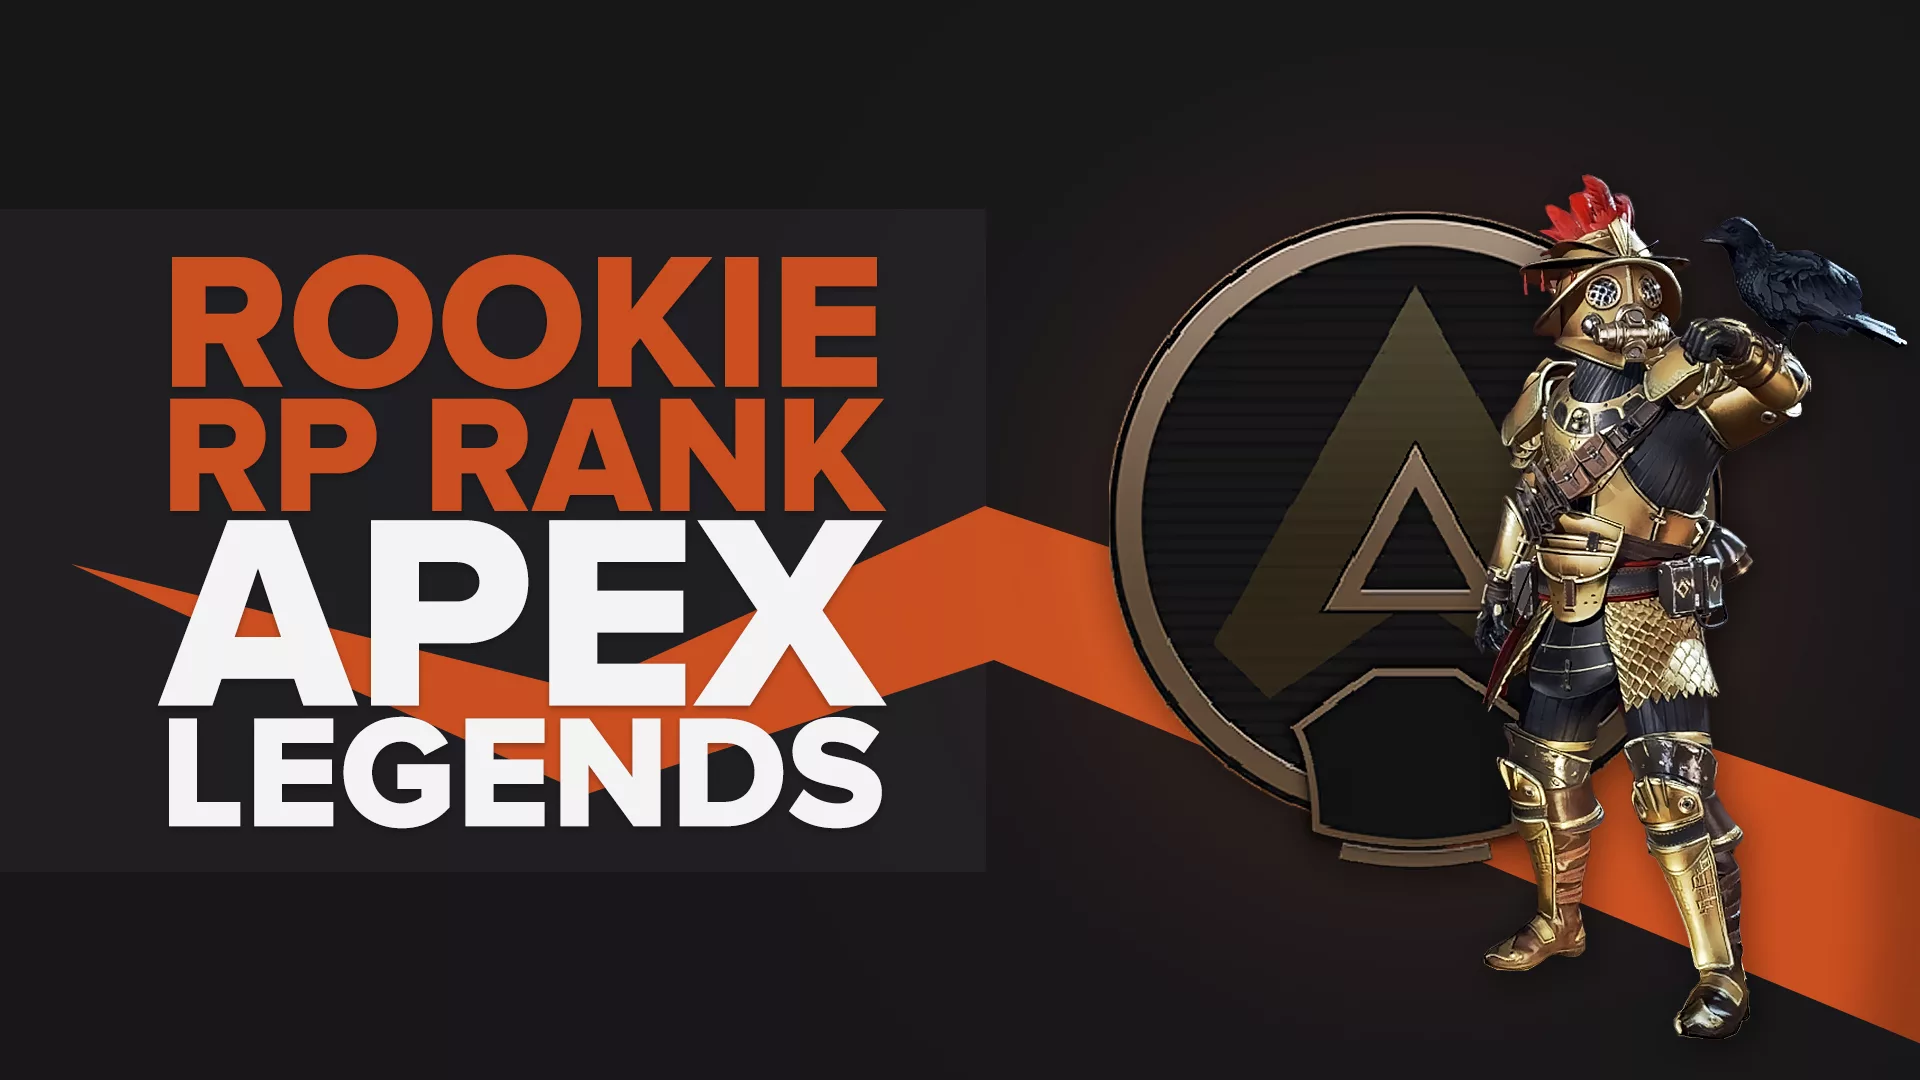 Is the Rookie Rank good? What is the RP of Rookie in Apex Legends? Time to find out!